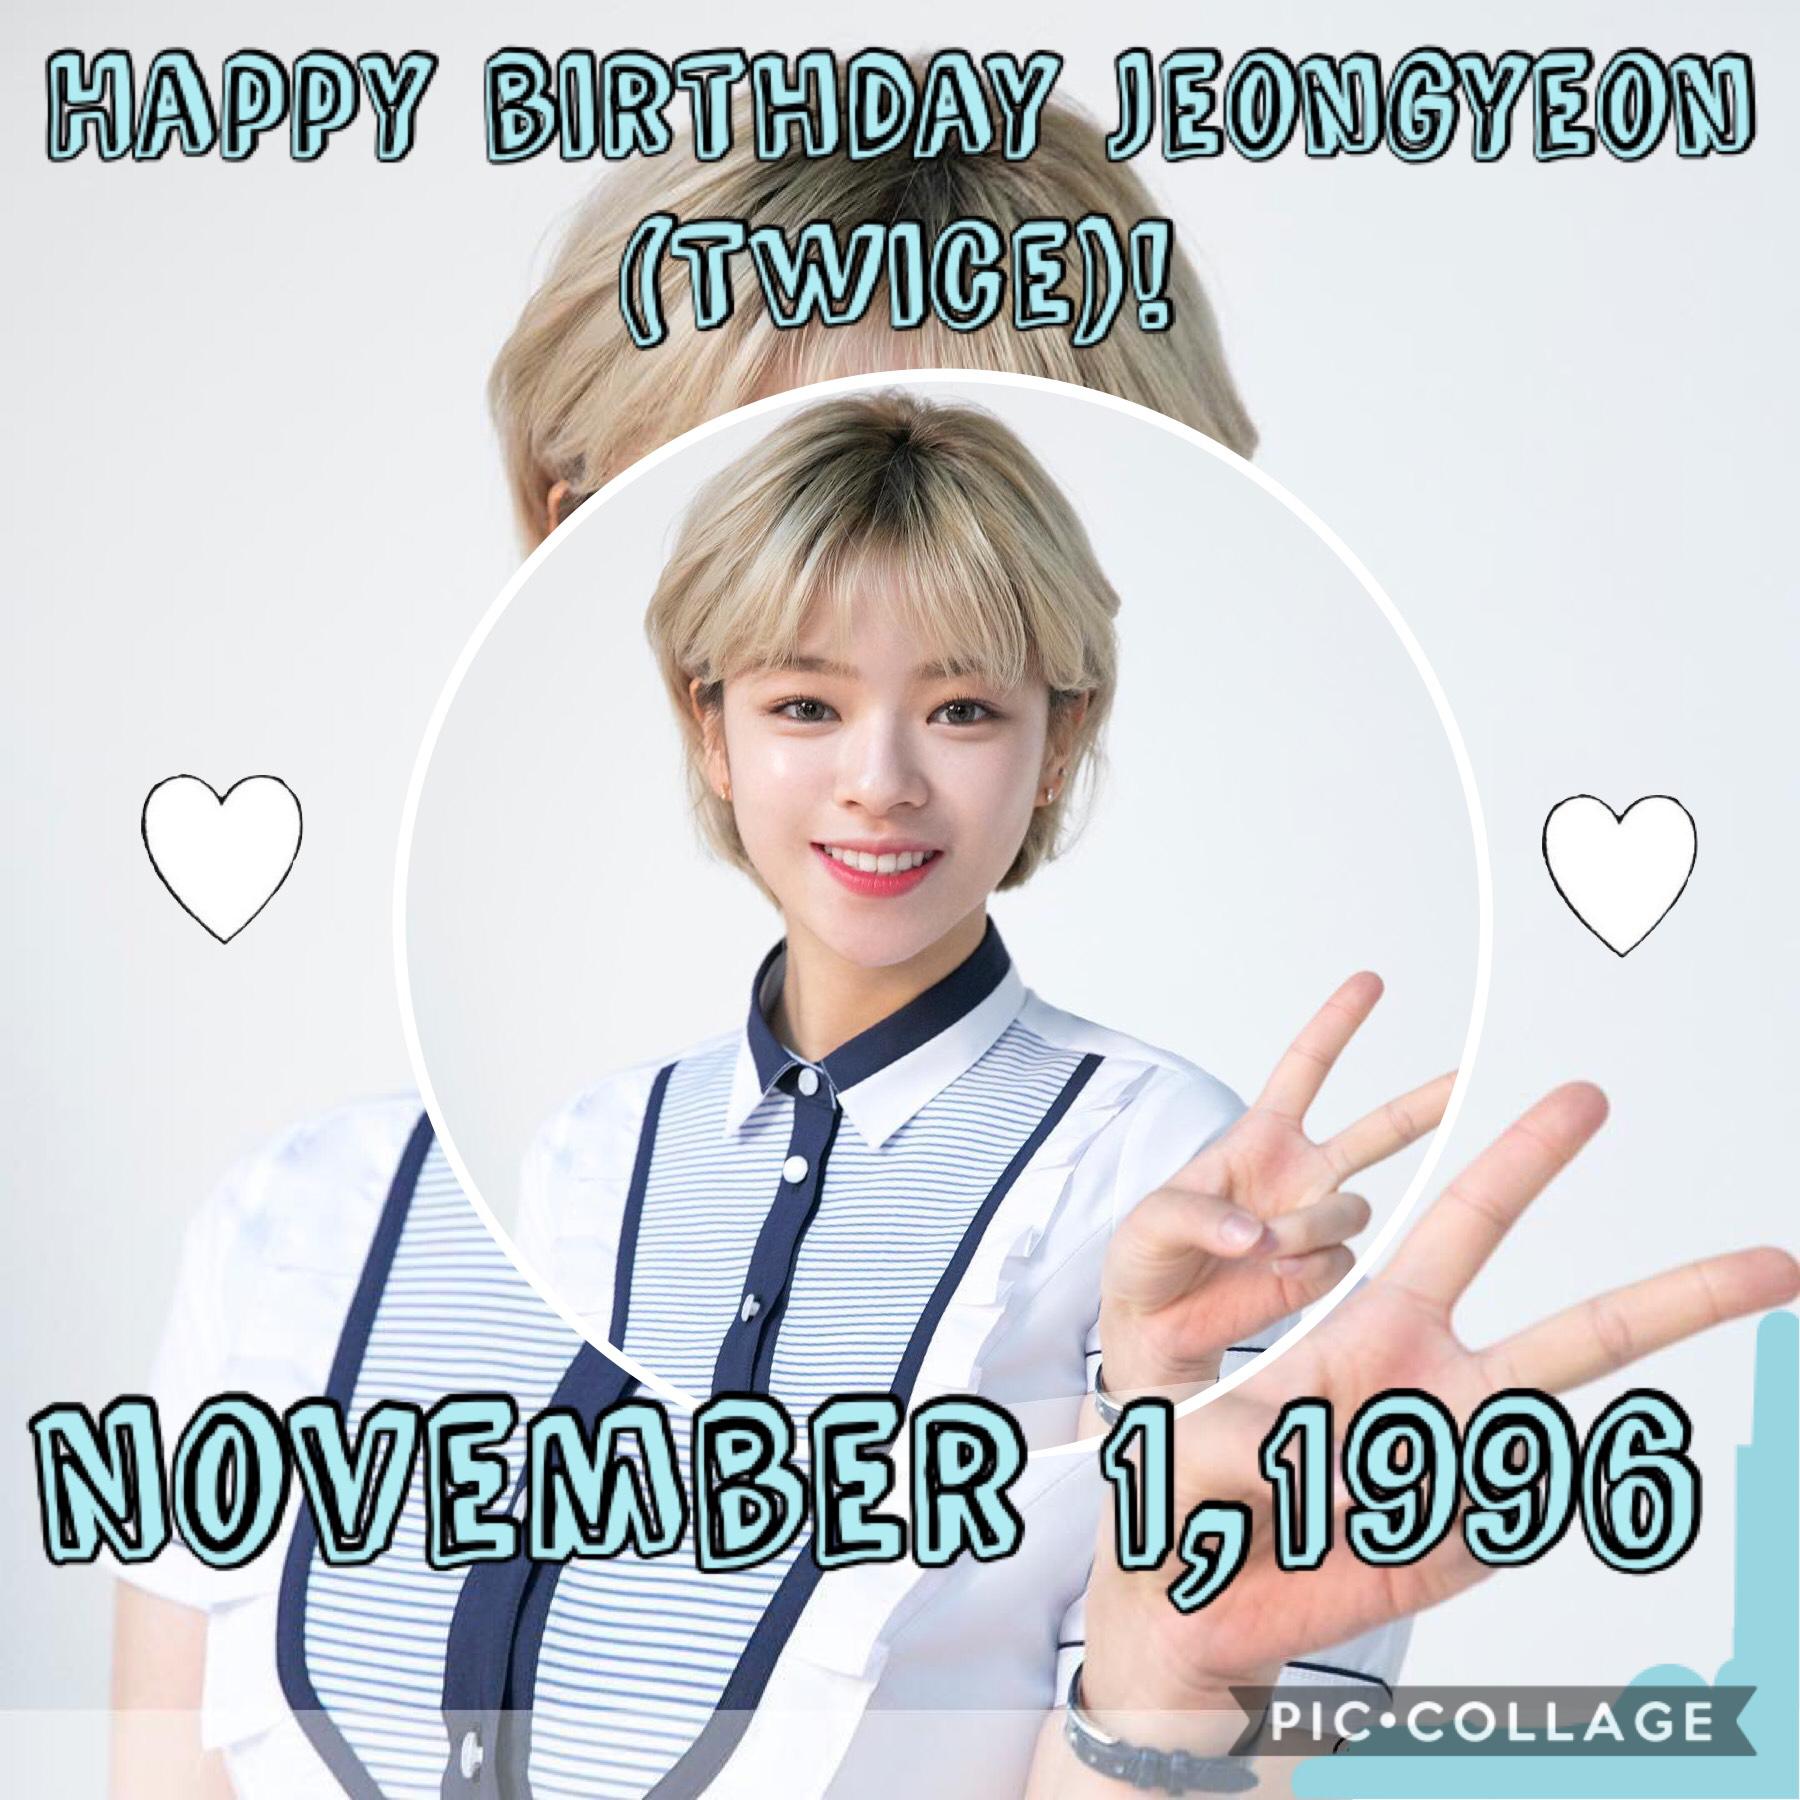 •Yoo Jeongyeon•
Happy birthday!!! Ugh she’s so pretty!!!💞 I can’t wait for Twice’s comeback. Are you excited? Yes or yes?!!!!
~Whoop